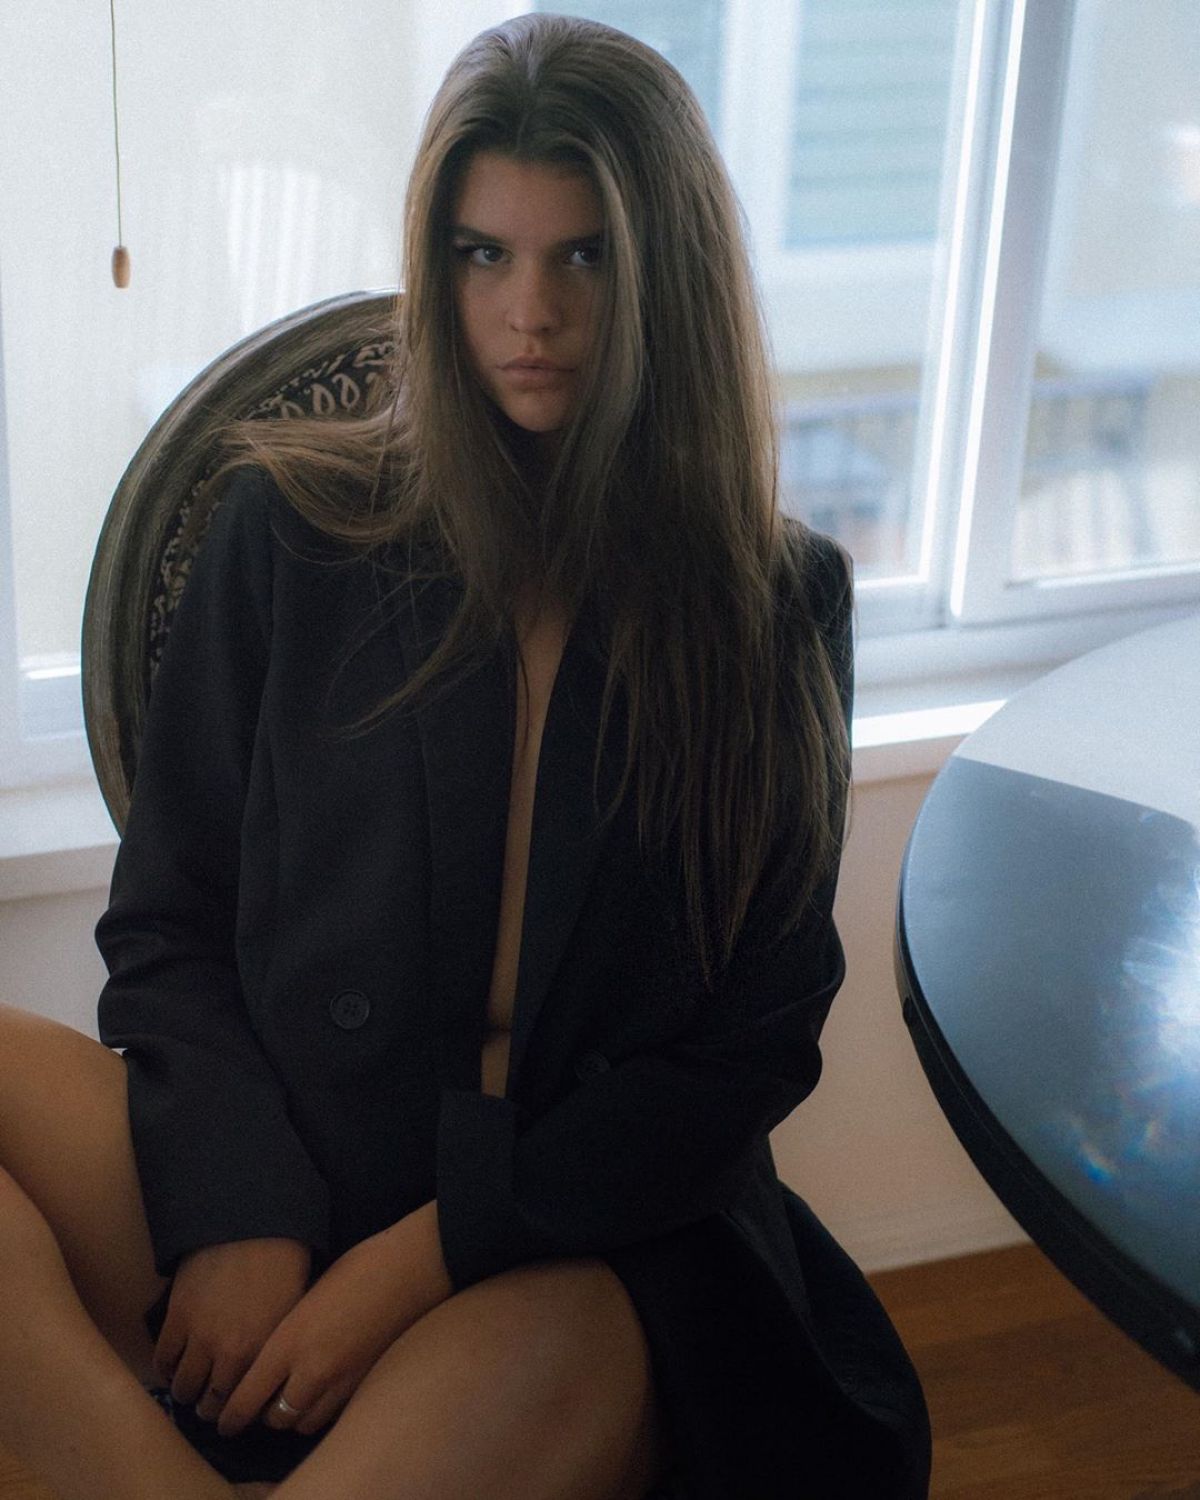 MAEVE TOMALTY at a Photoshoot, January 2020. 